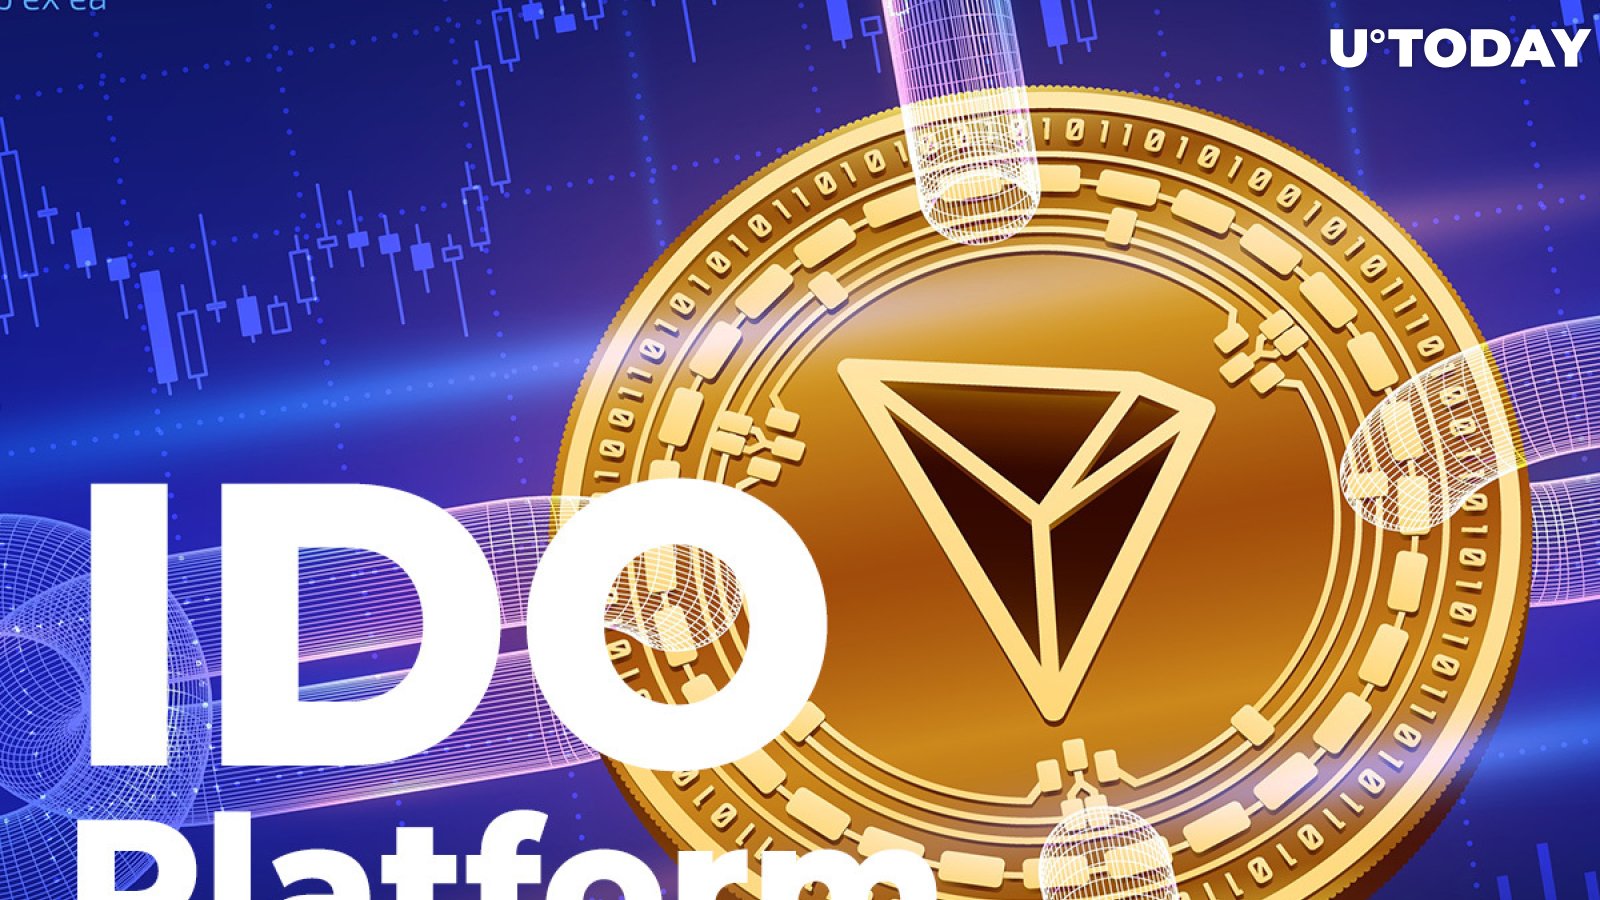 Tron to Release First Native IDO Platform in BSCPad Partnership: Details